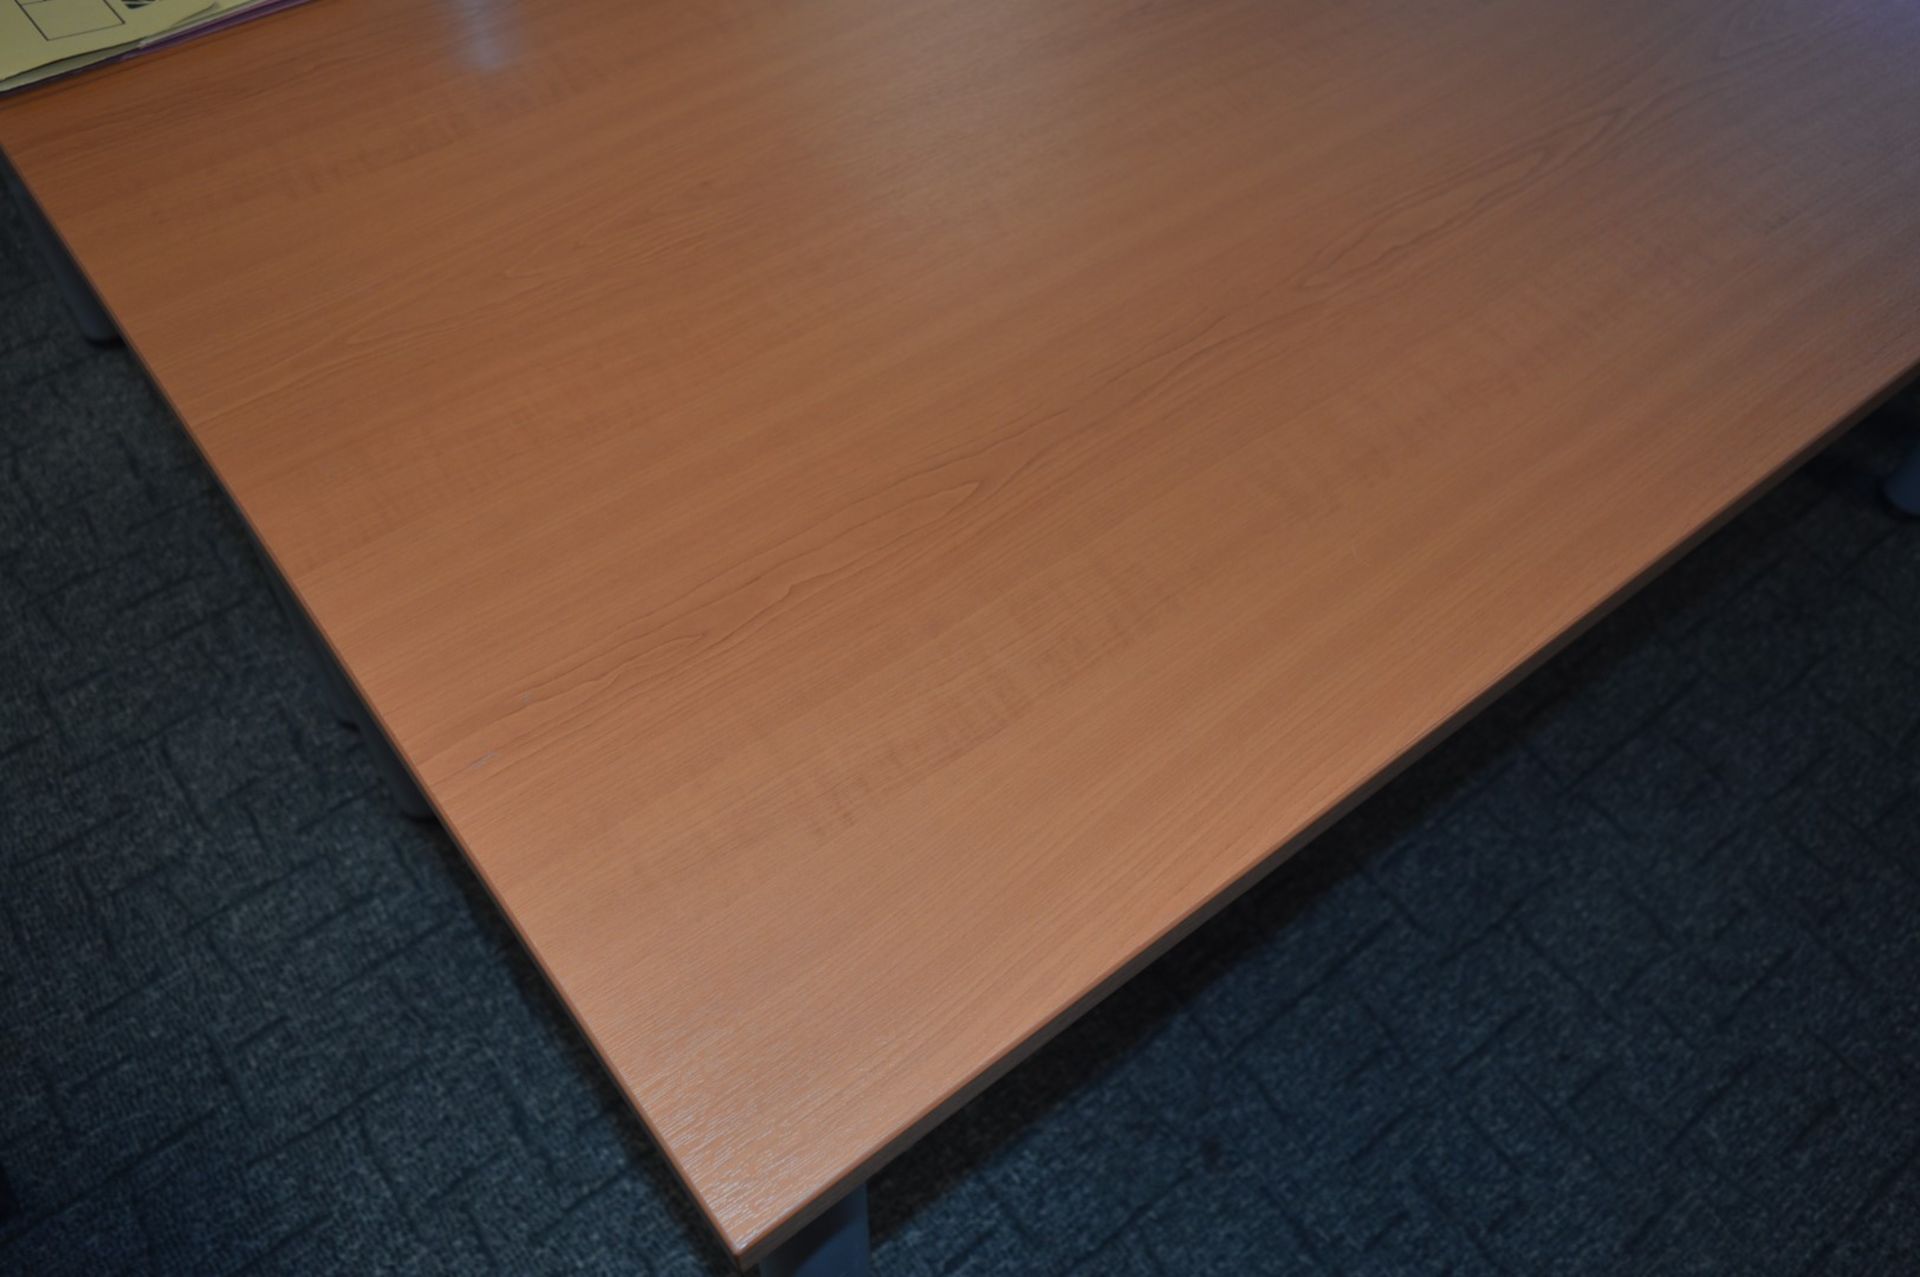 1 x Conference Office Table - Beech Finish - High Quality Office Furniture - H72 x W160 x D80 - Image 2 of 2